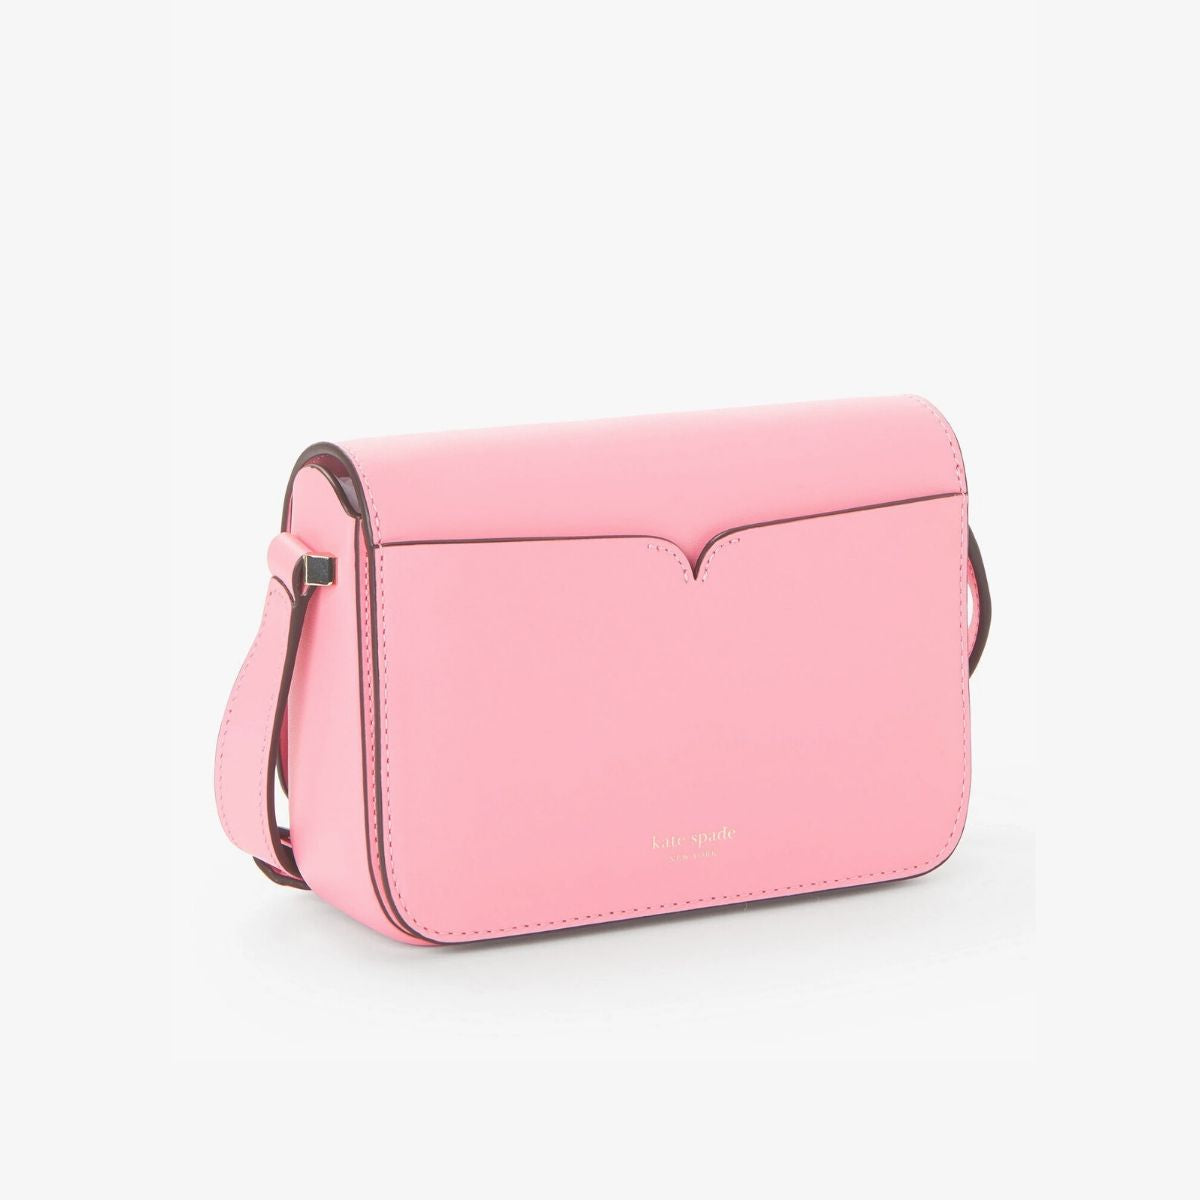 Kate Spade Nicola Twistlock Small Shoulder Bag Review (20) - With Wonder  and Whimsy